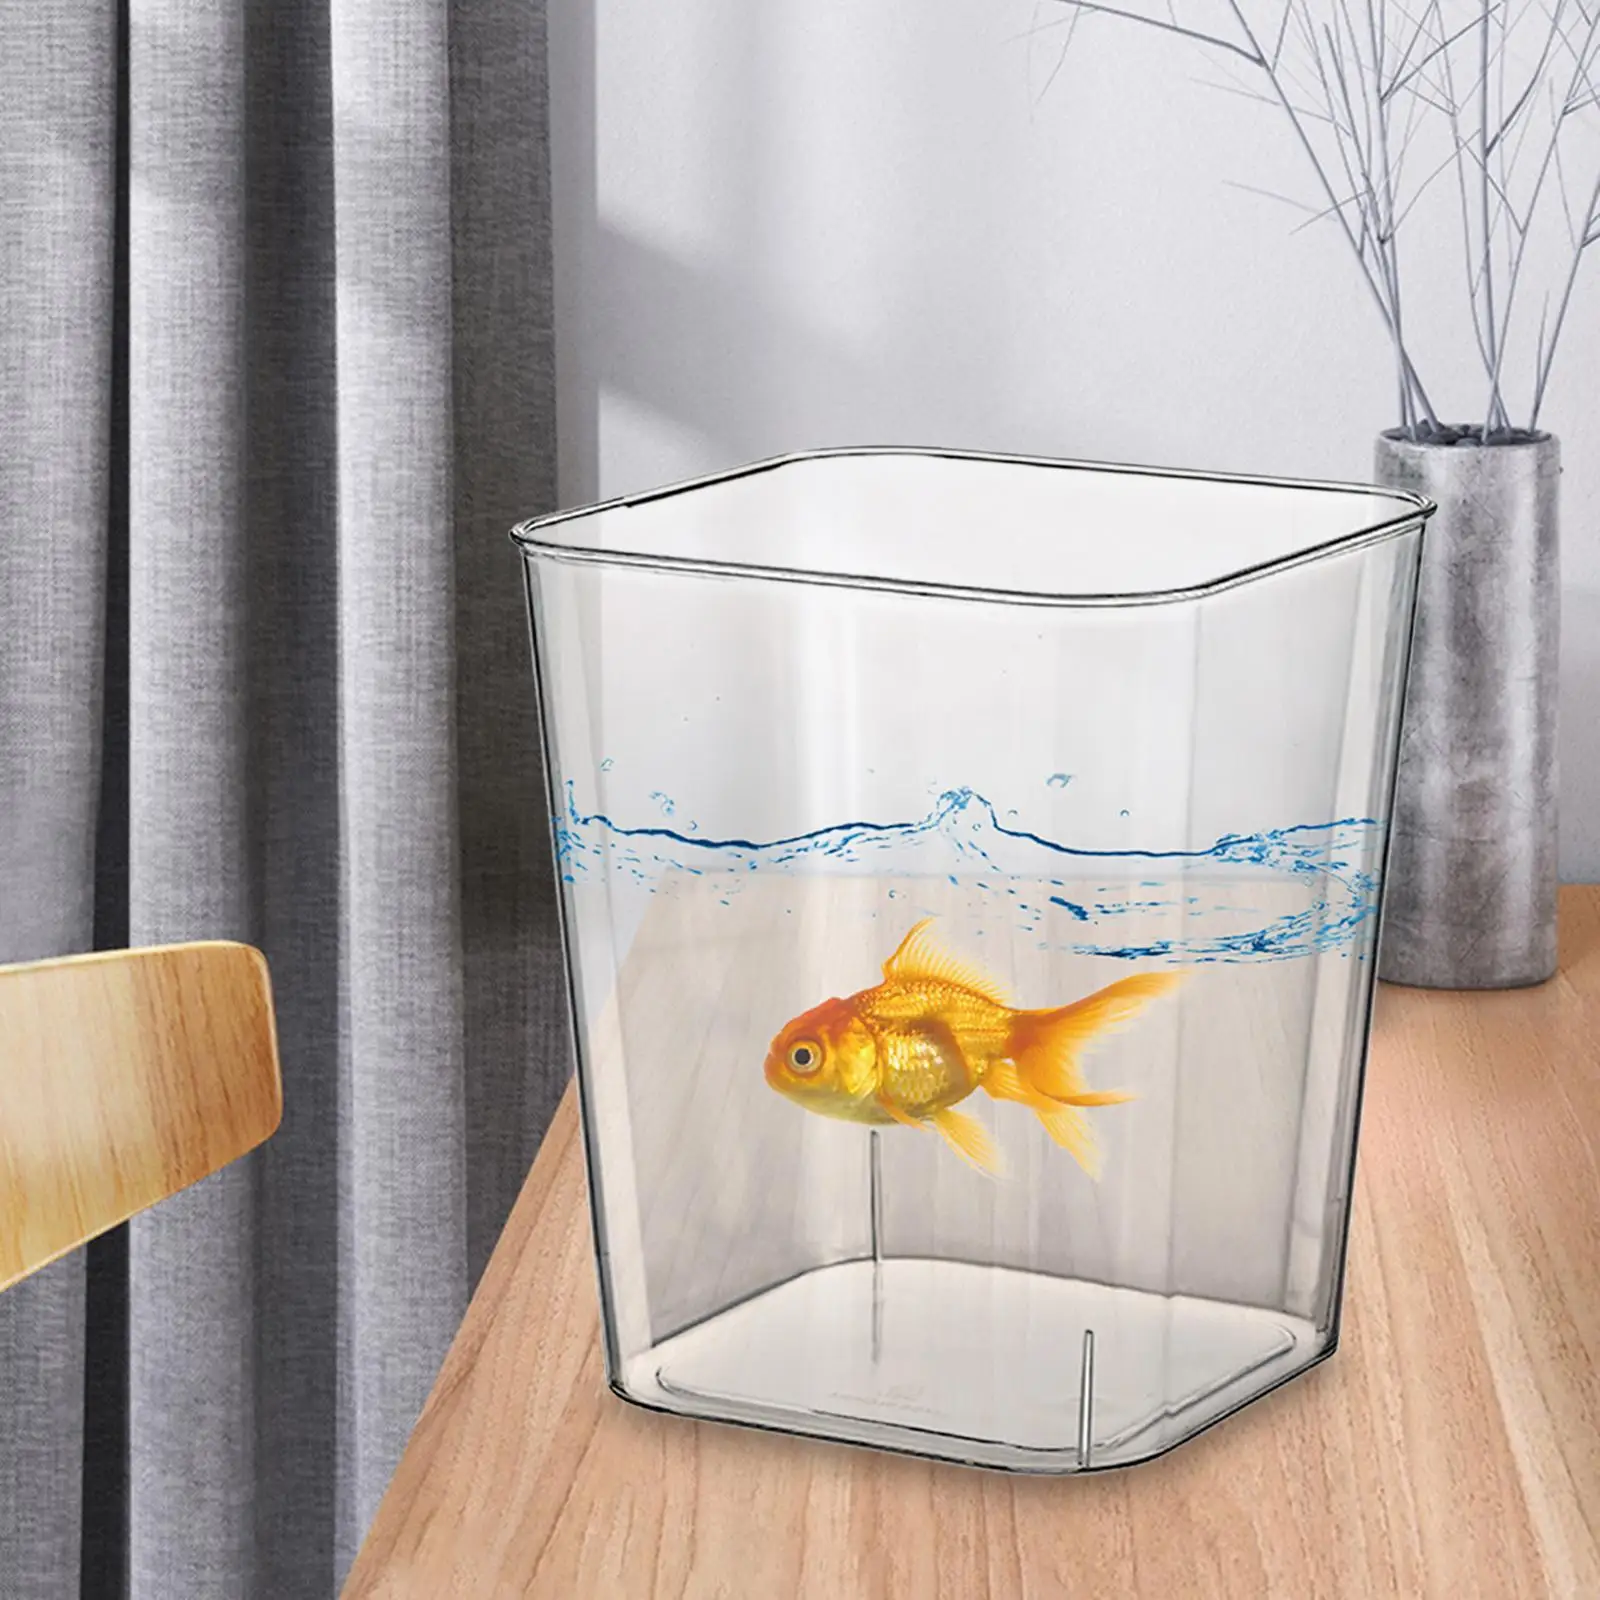 Multipurpose Trash Can Storage Box Large Capacity Decorative Visible Wastebasket Waste Container for Kitchen Car Bathroom Indoor